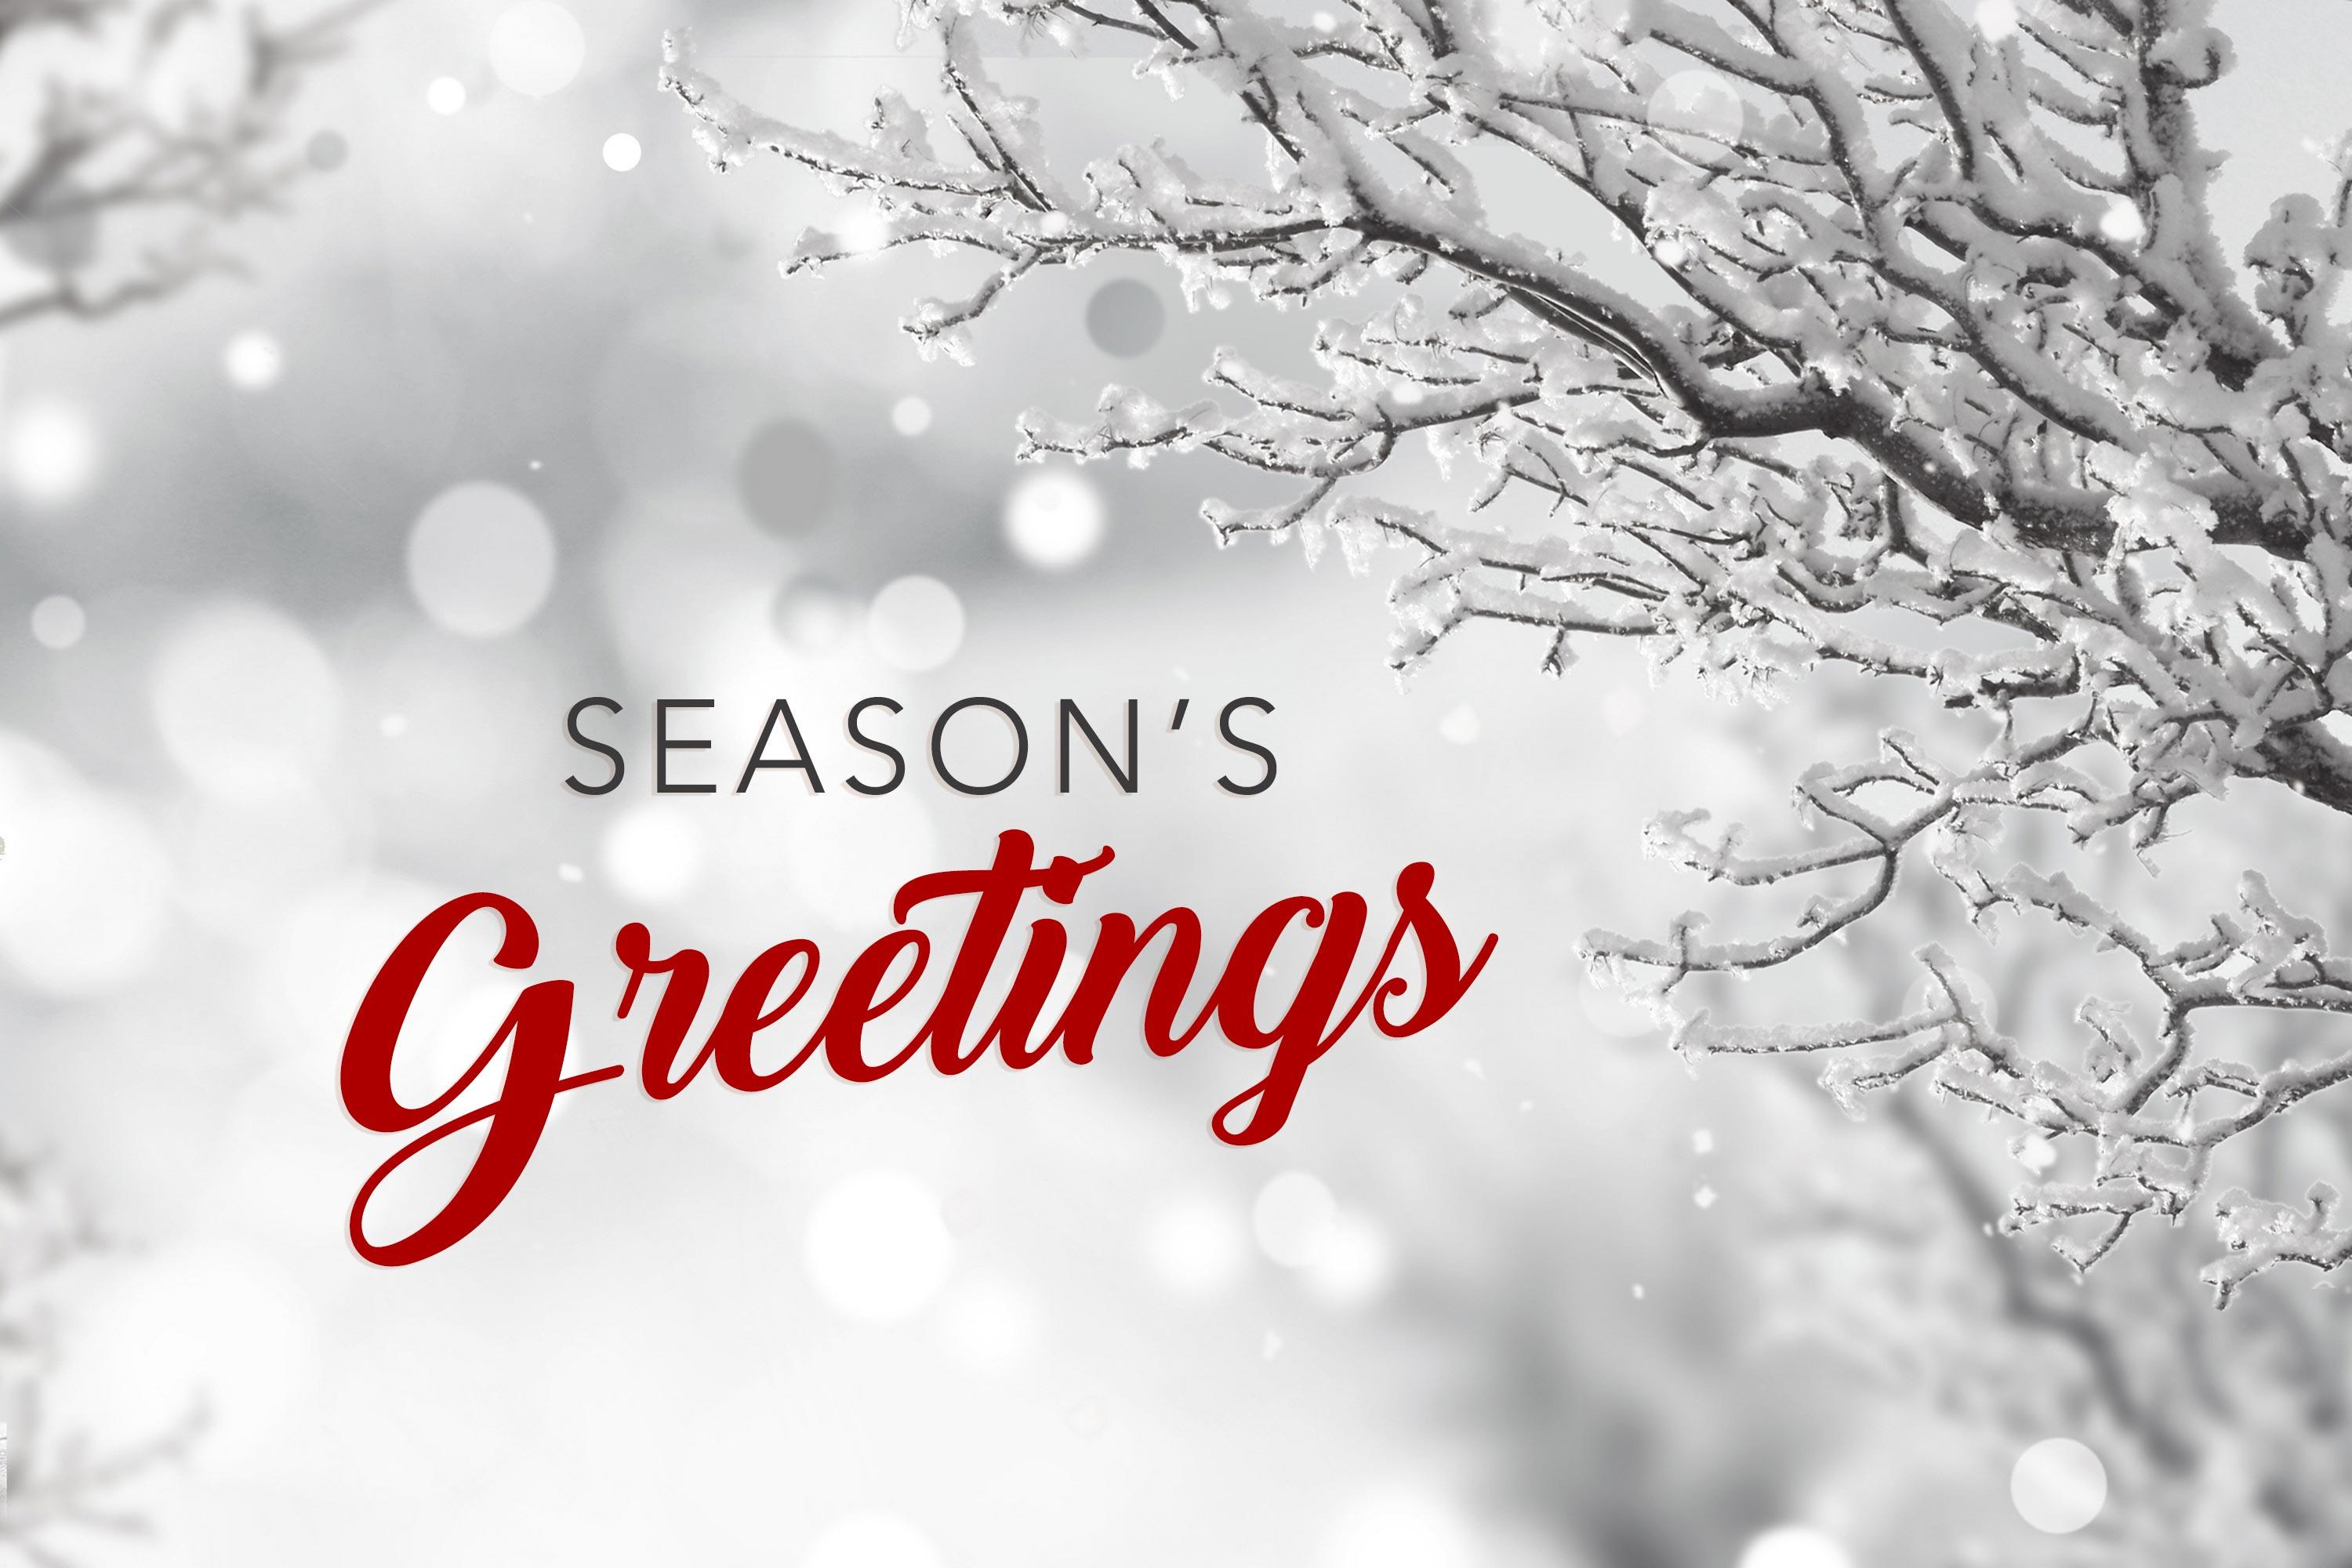 Season's Greetings Cards Stock Image, HD Wallpaper & Winter Picture For 2020